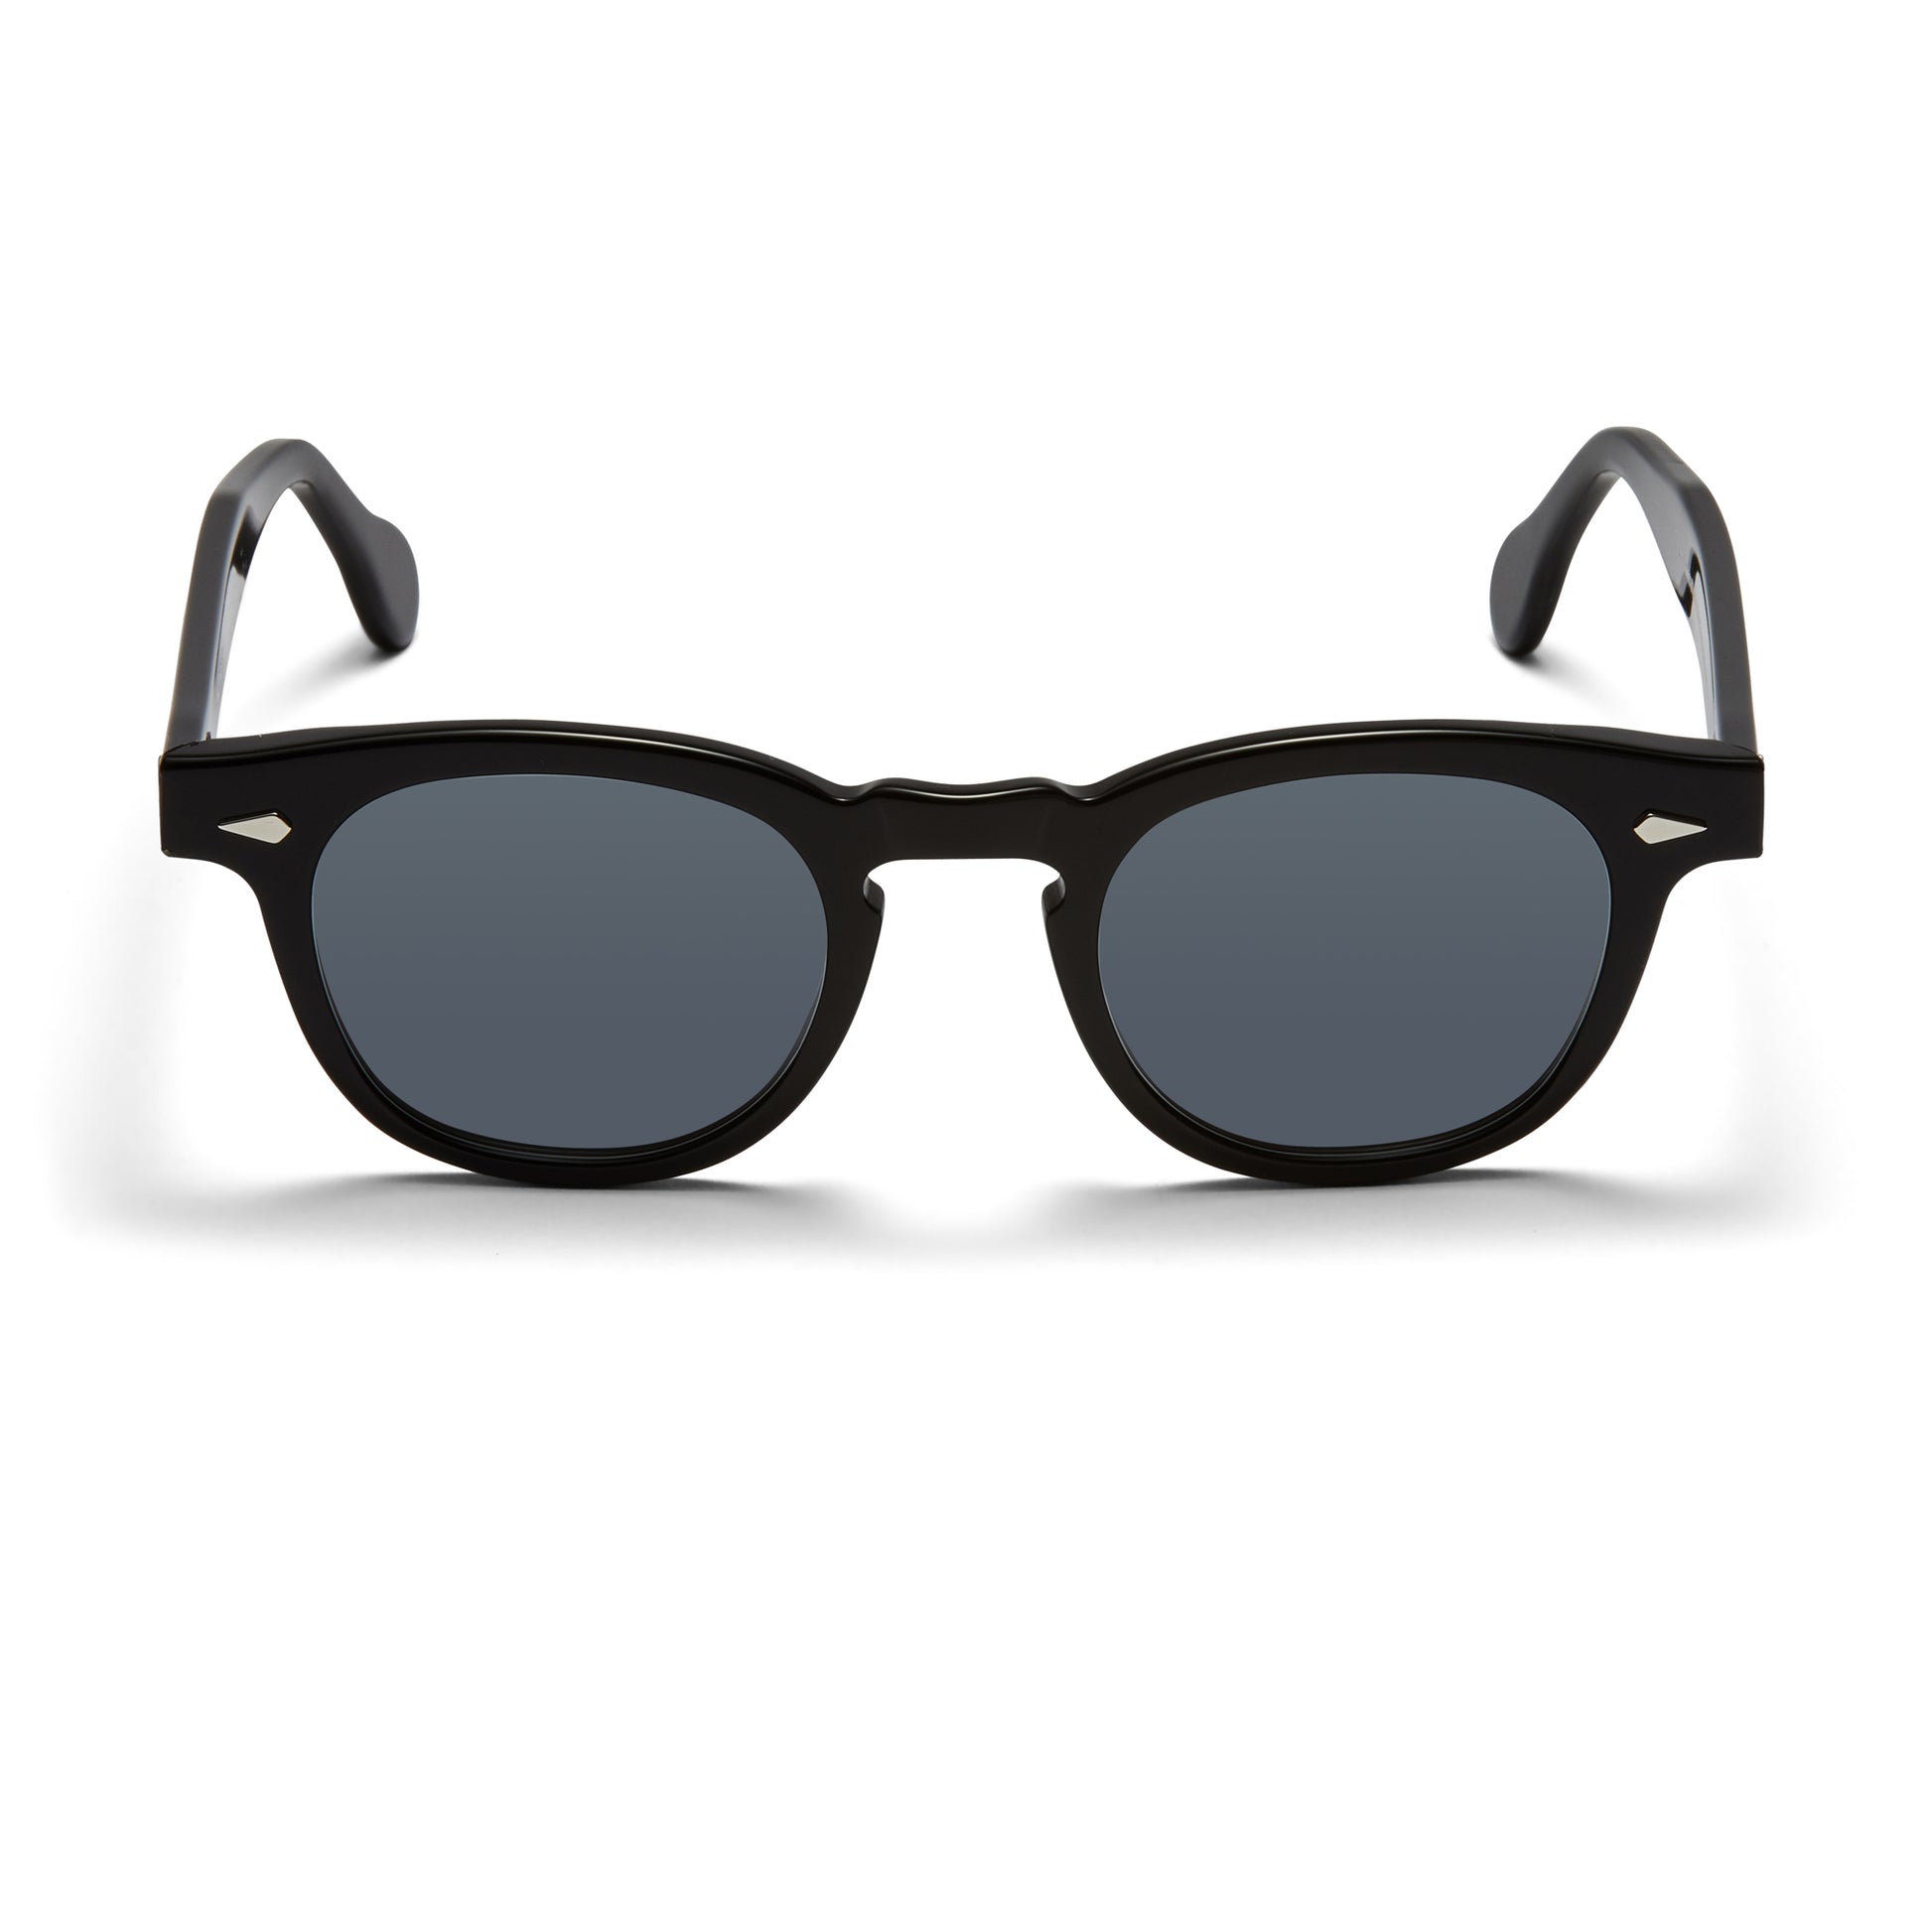 A front view of the glossy black Arnel USA sunglass frame—the Vintage eyewear. 